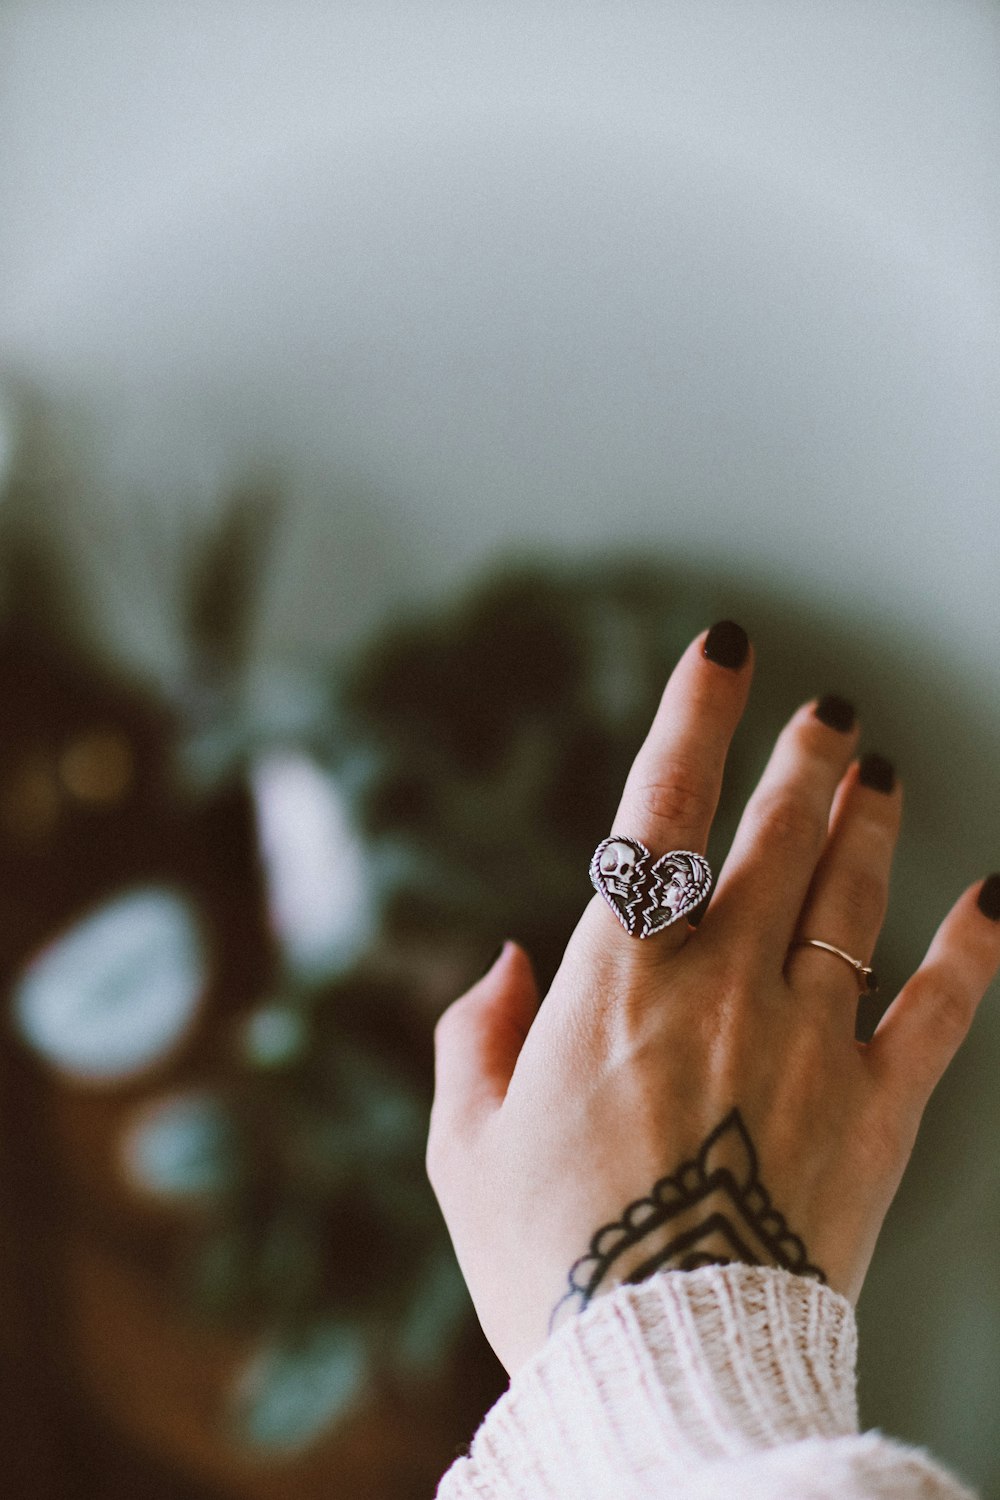 a woman's hand with a tattoo on her finger